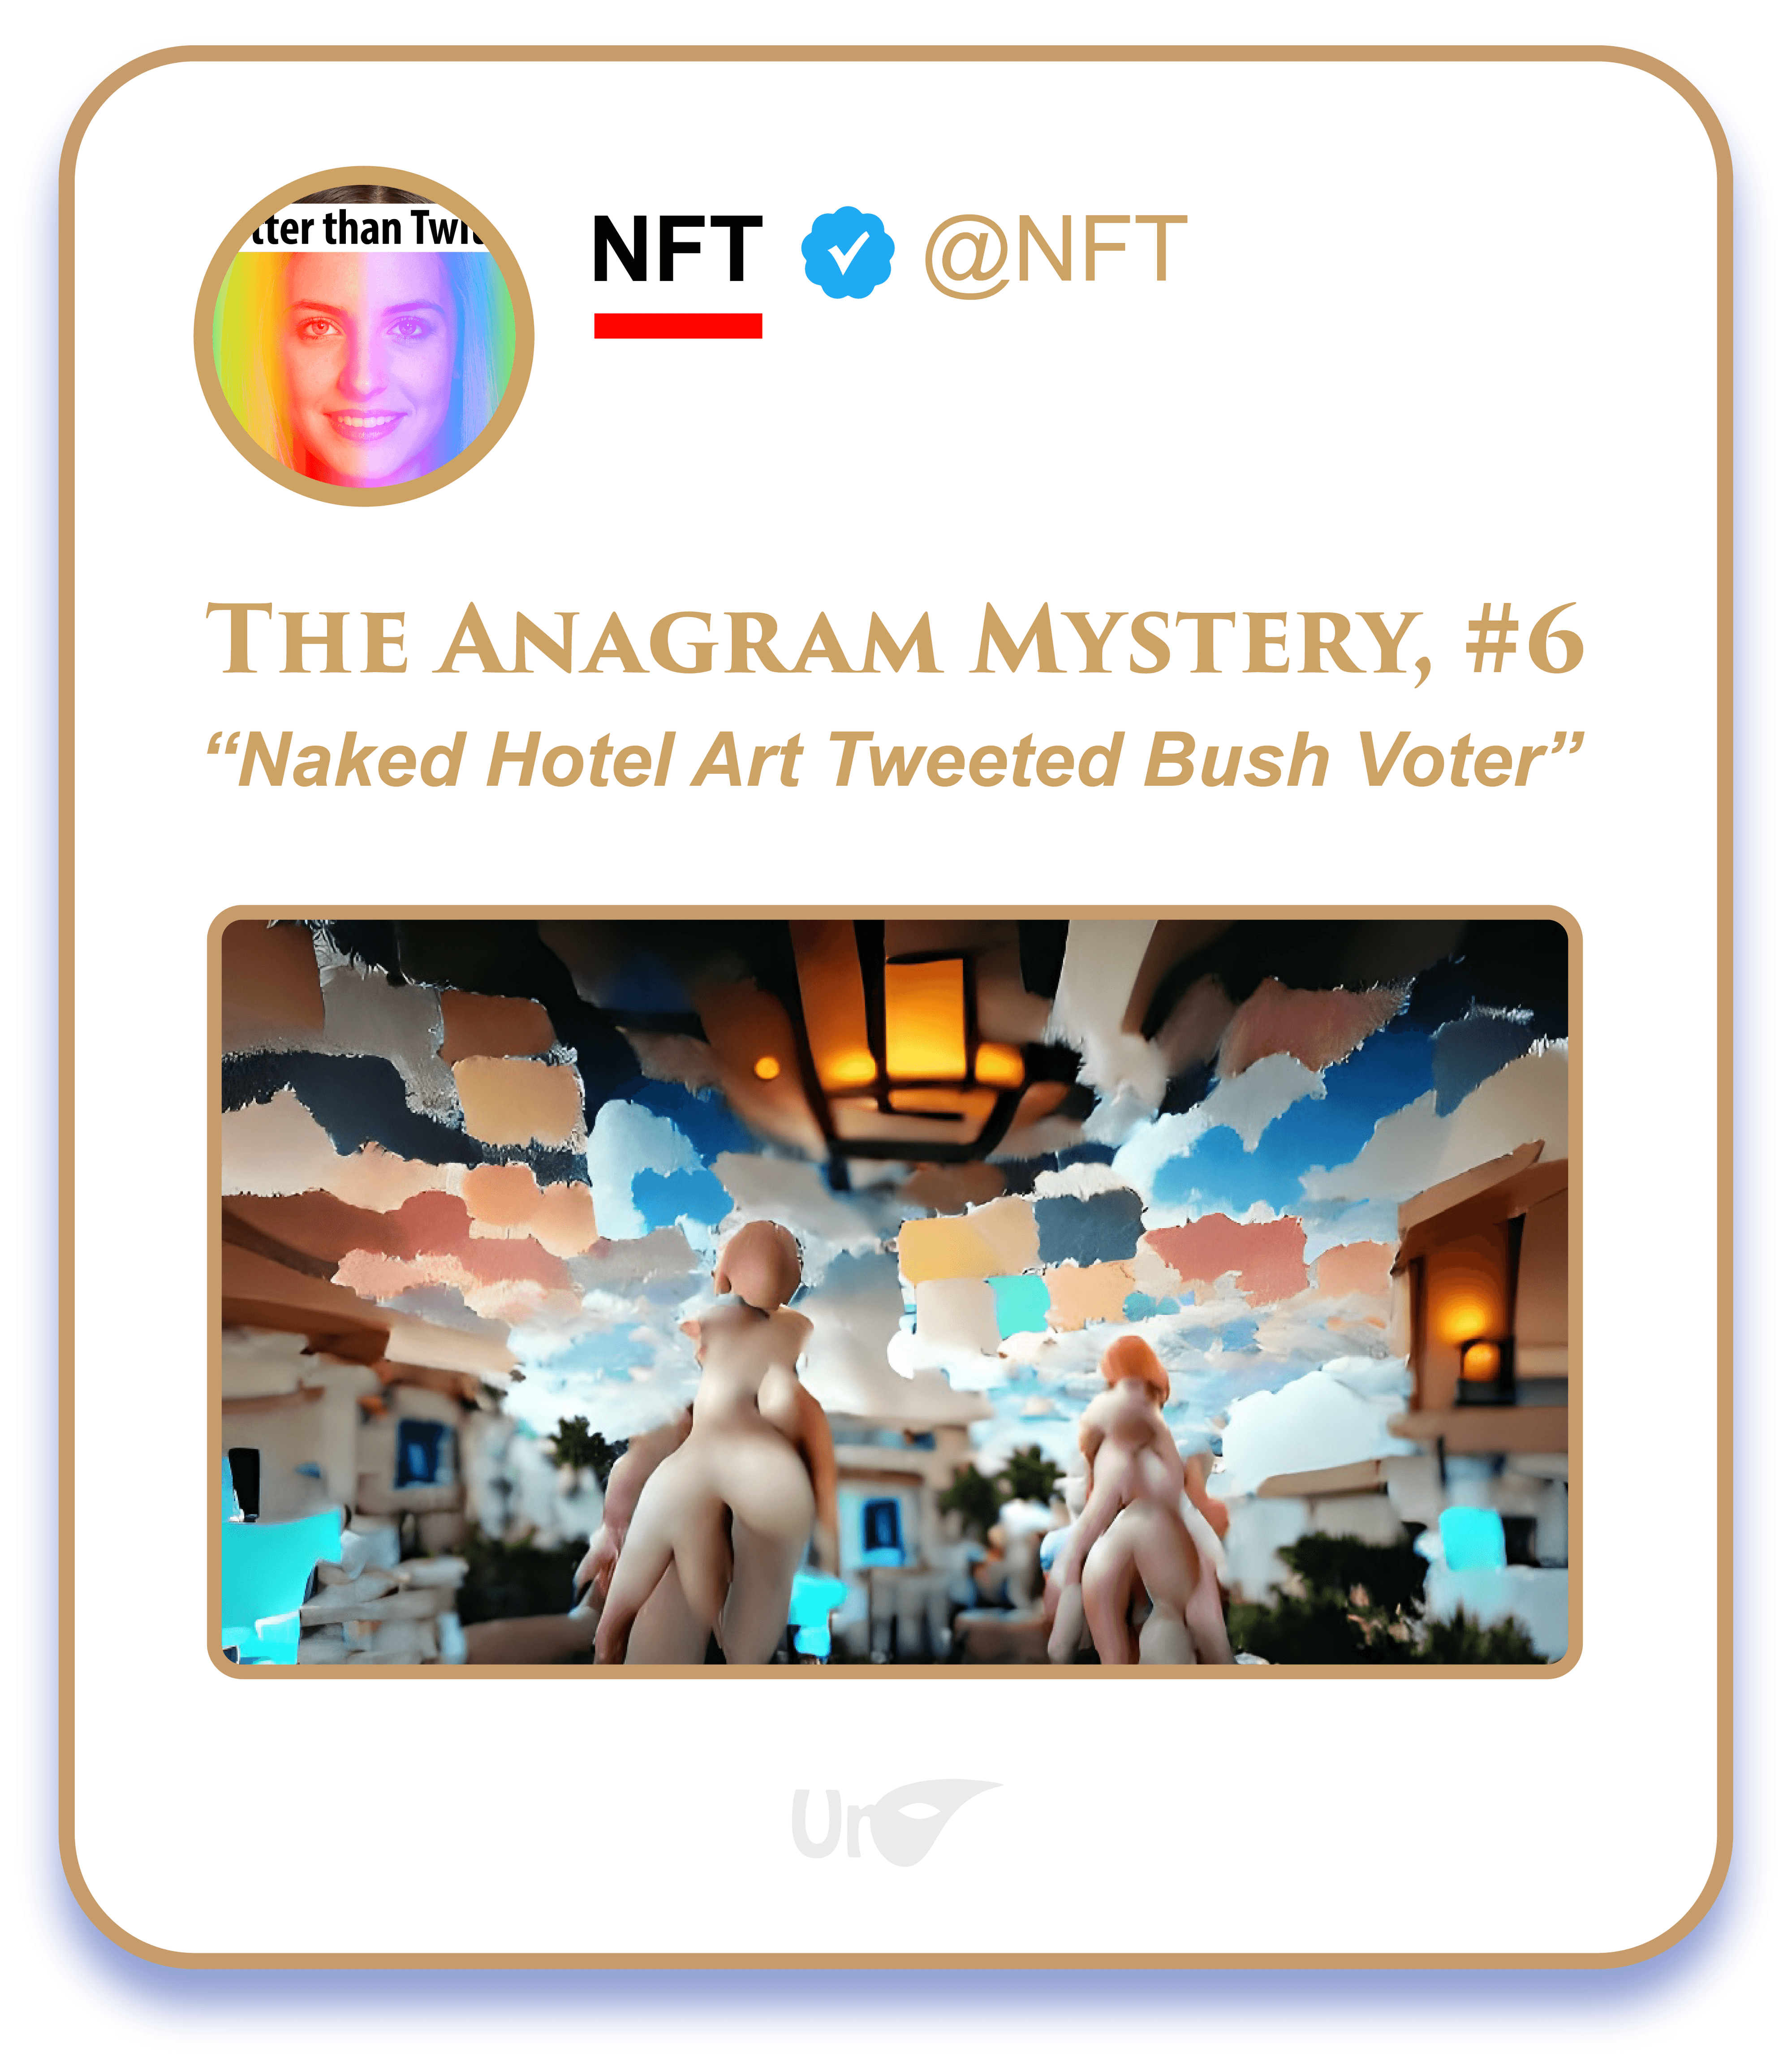 The Anagram Mystery, #6: "Naked Hotel Art Tweeted Bush Voter"